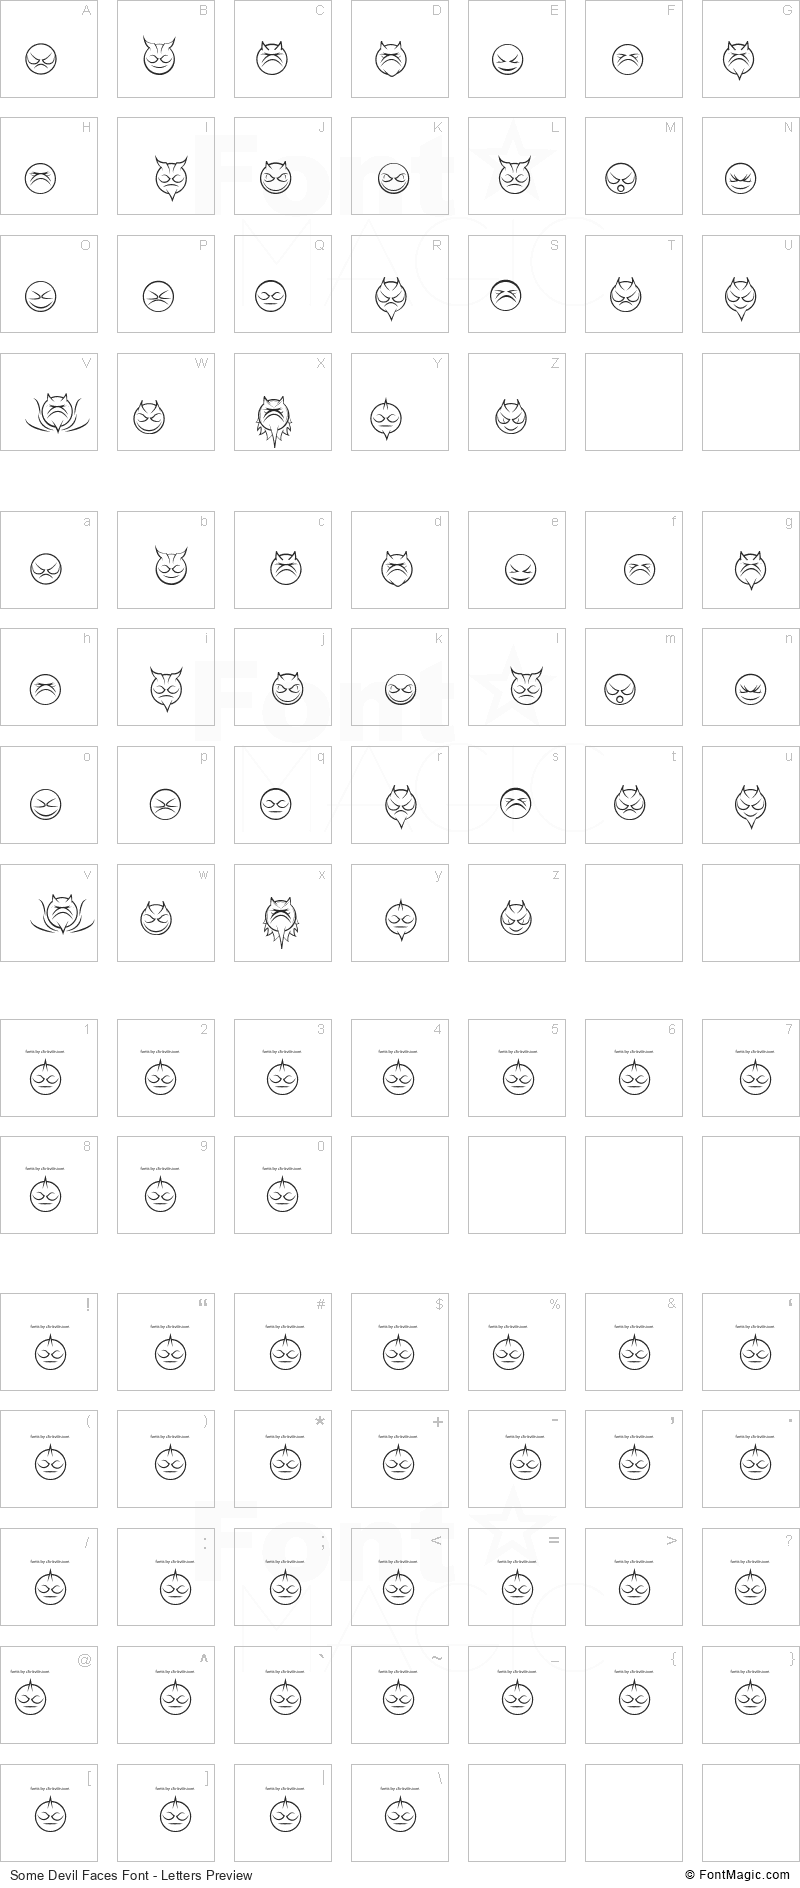 Some Devil Faces Font - All Latters Preview Chart